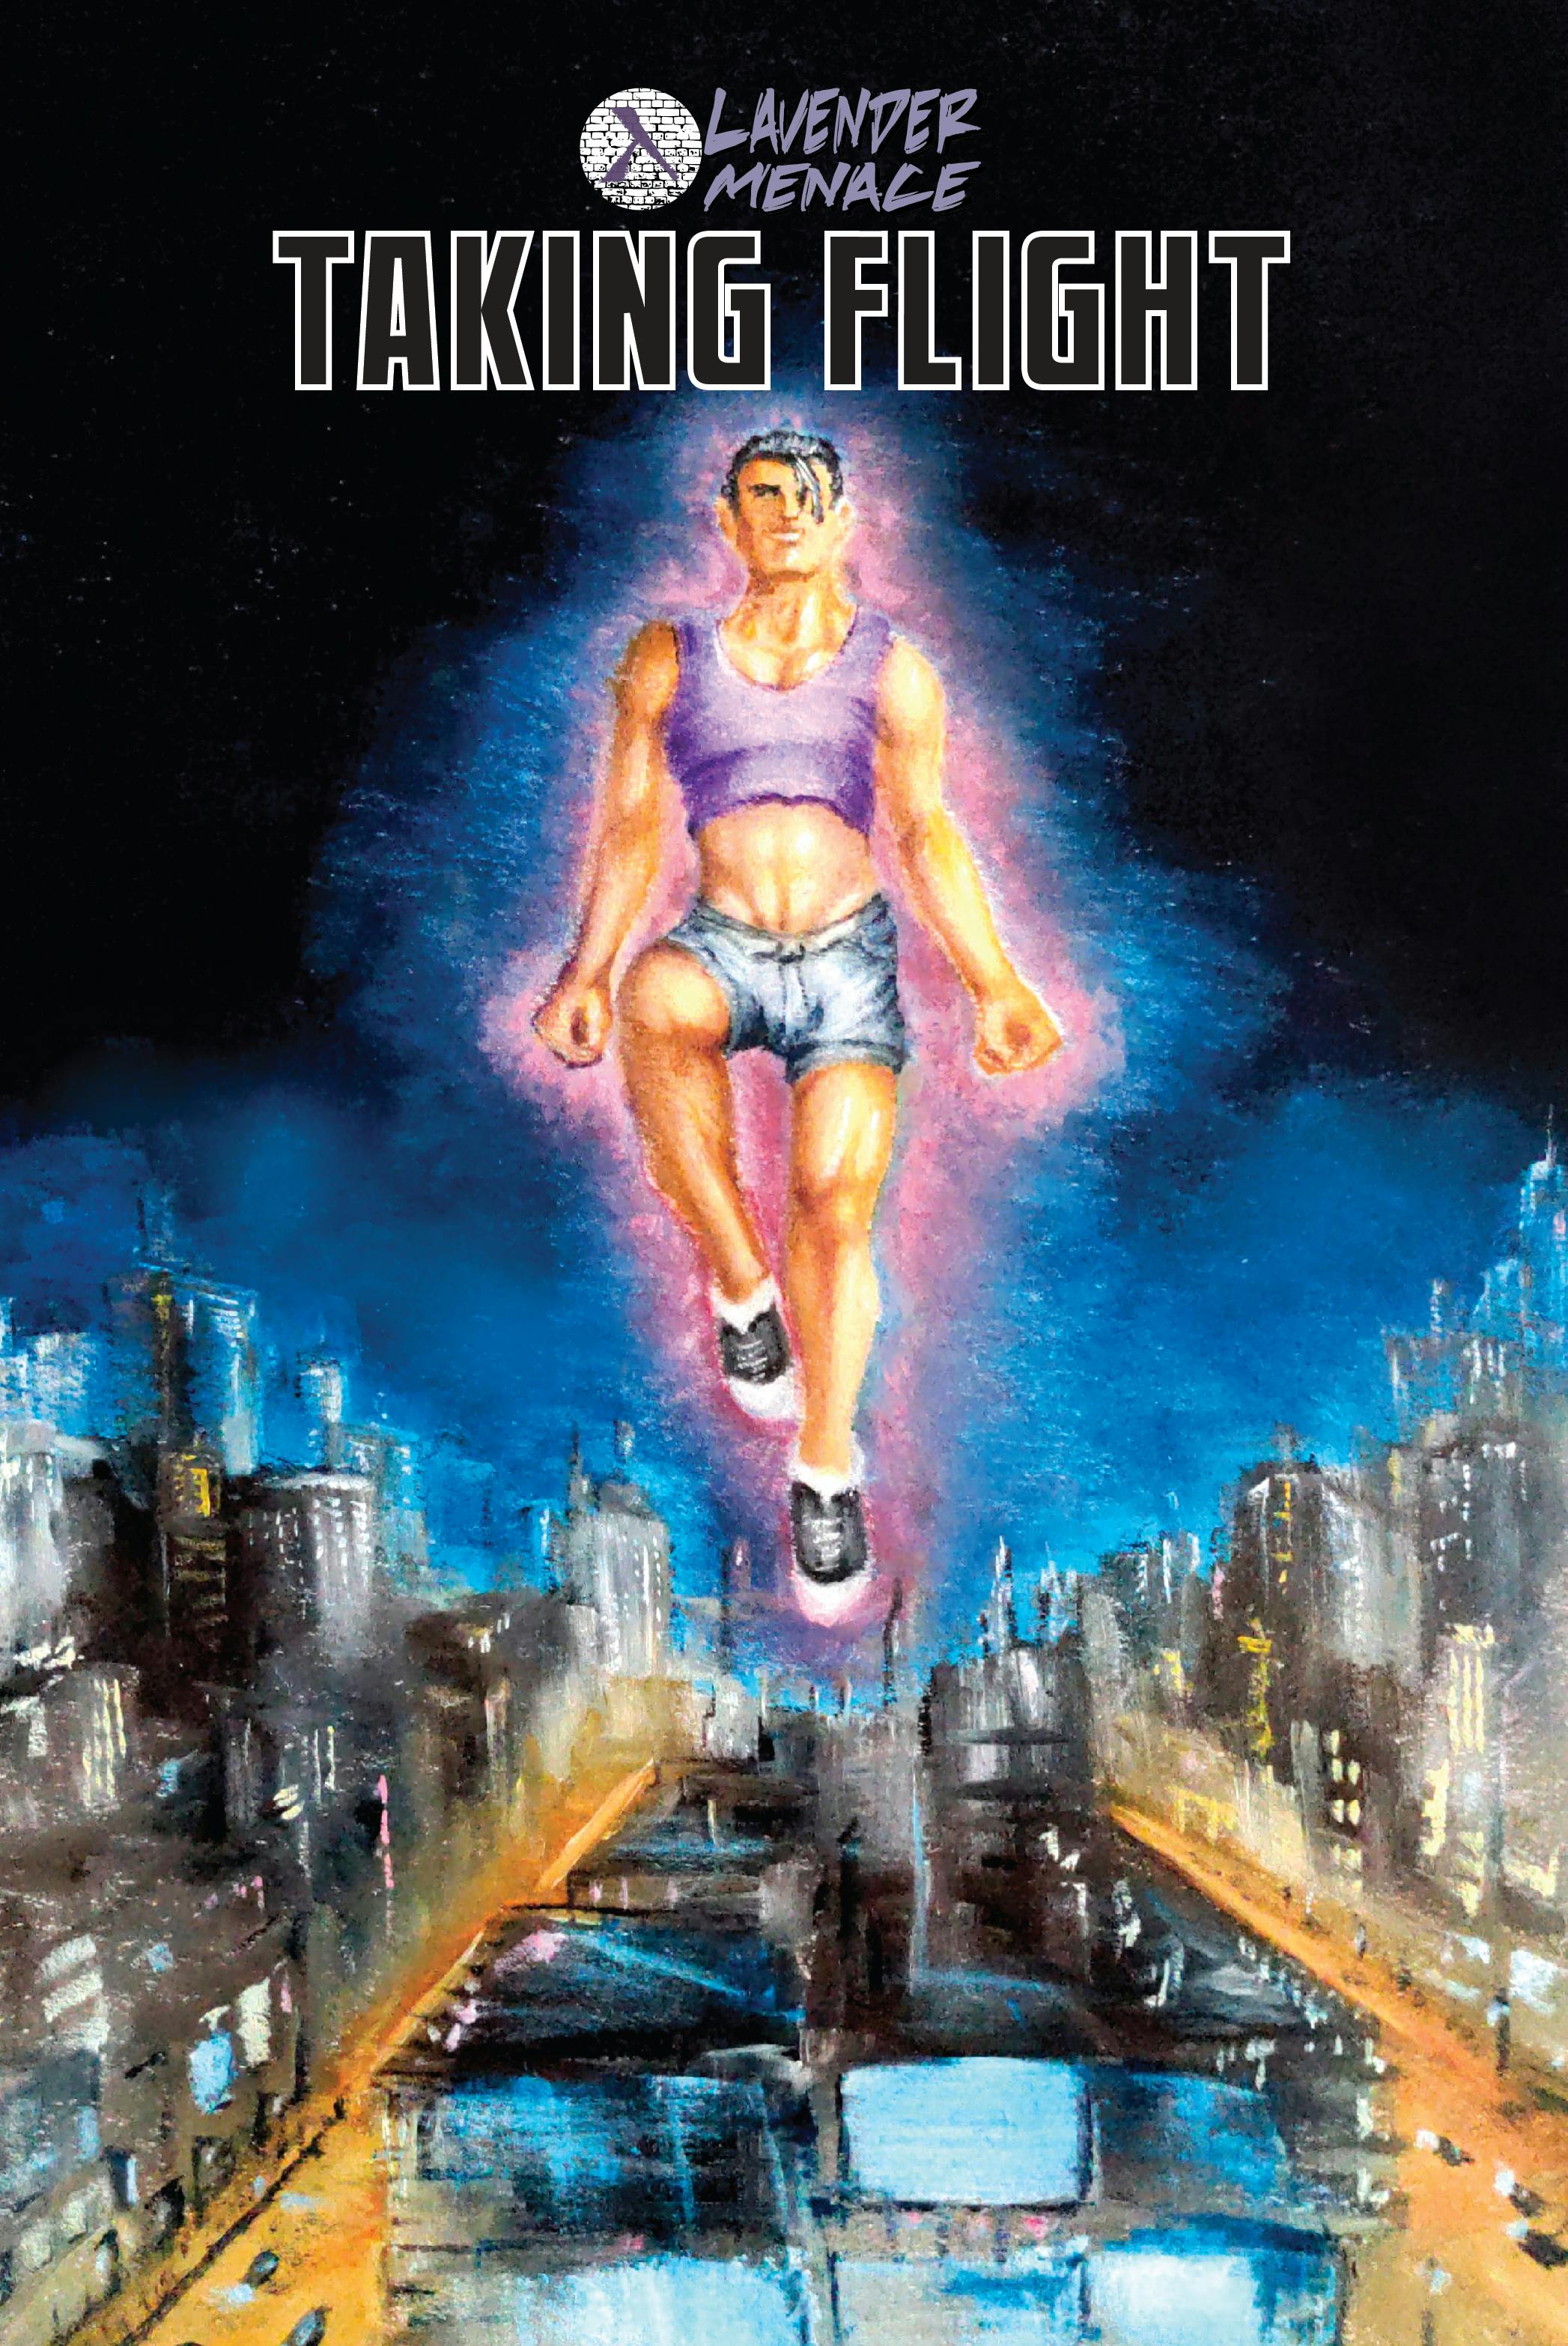 comic book cover with sexy young man flying above the NYC skyline at night